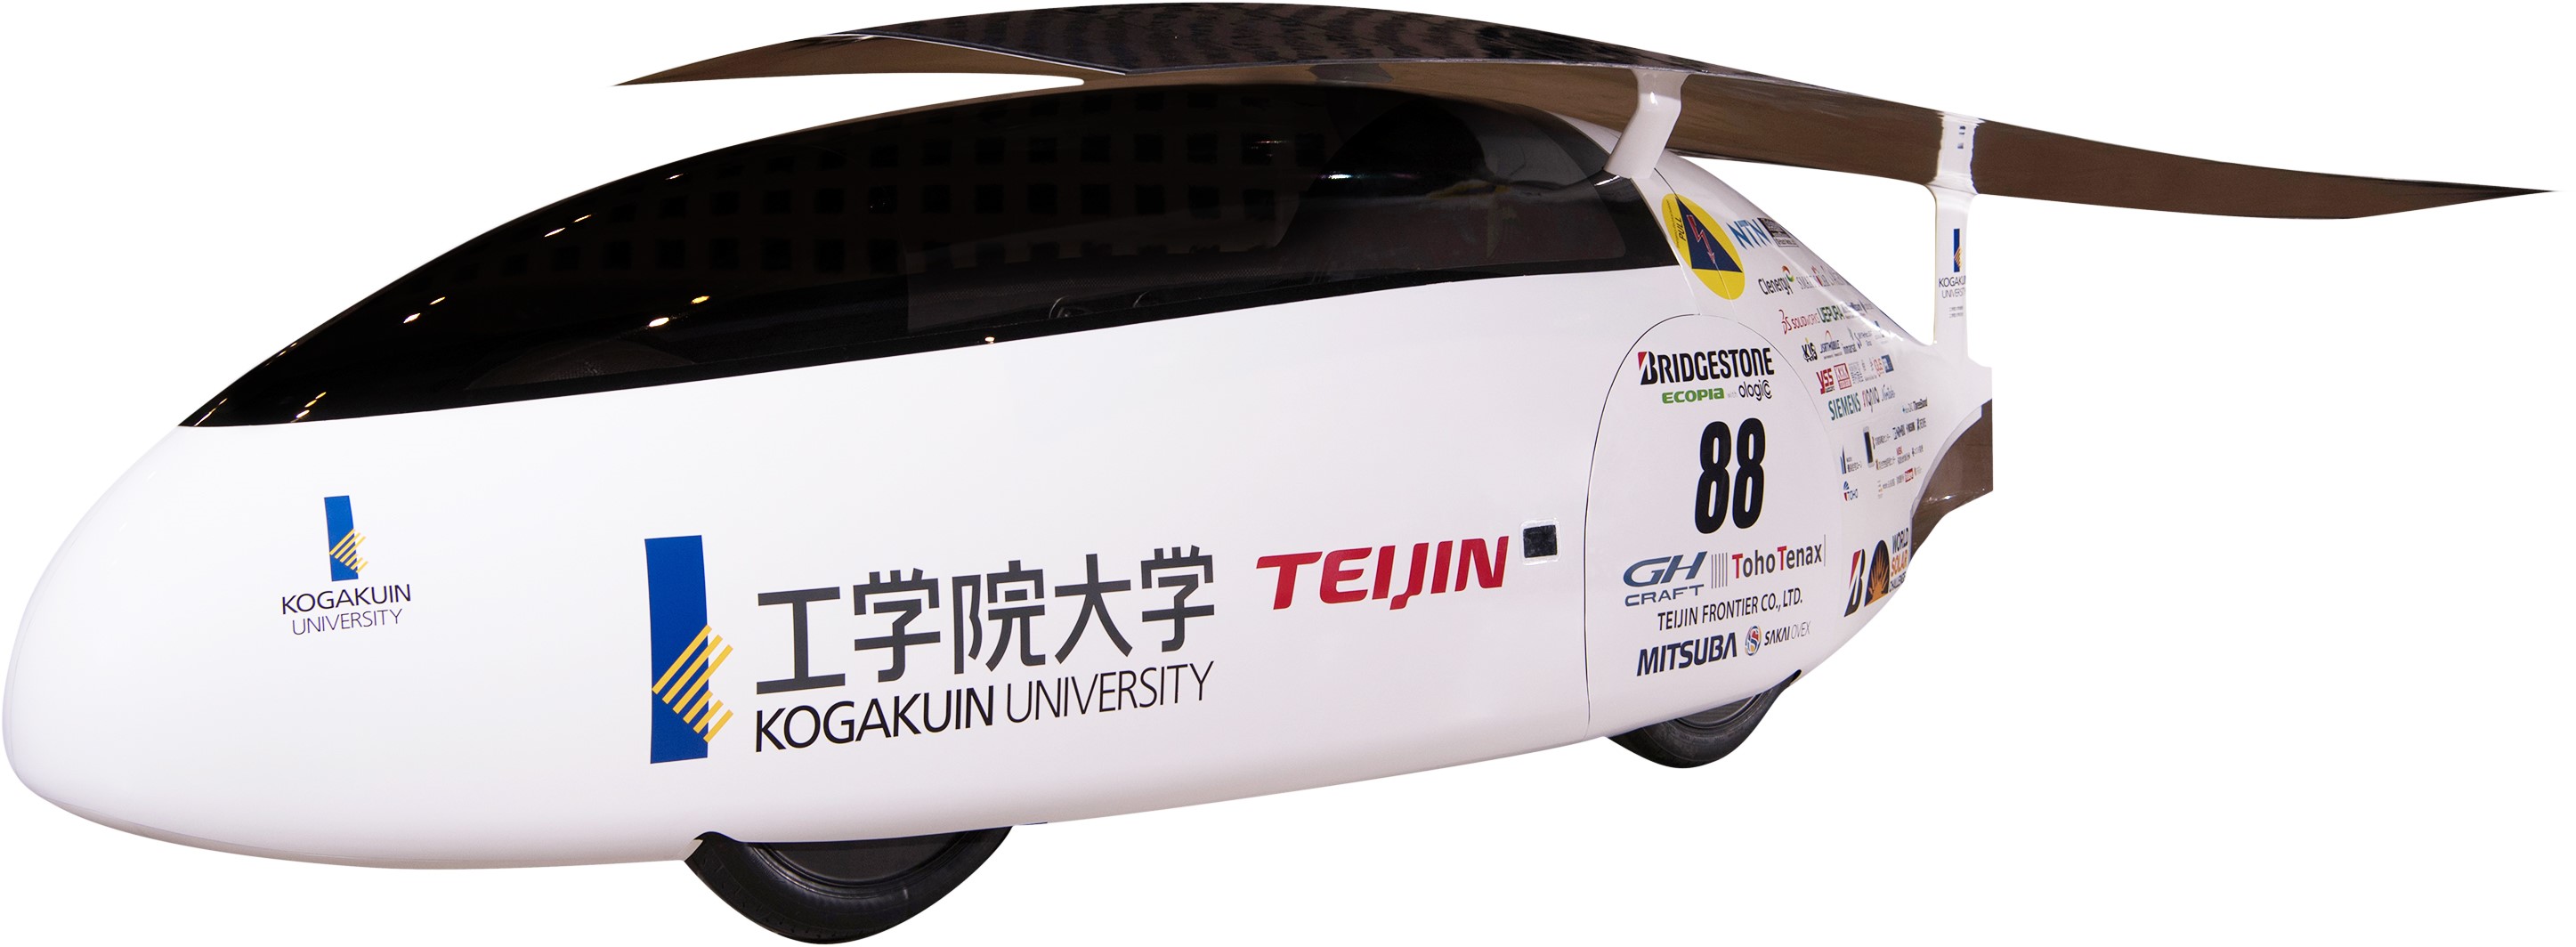 The vehicle, developed by Kogakuin University in Japan, will take part in the world’s biggest solar car race.